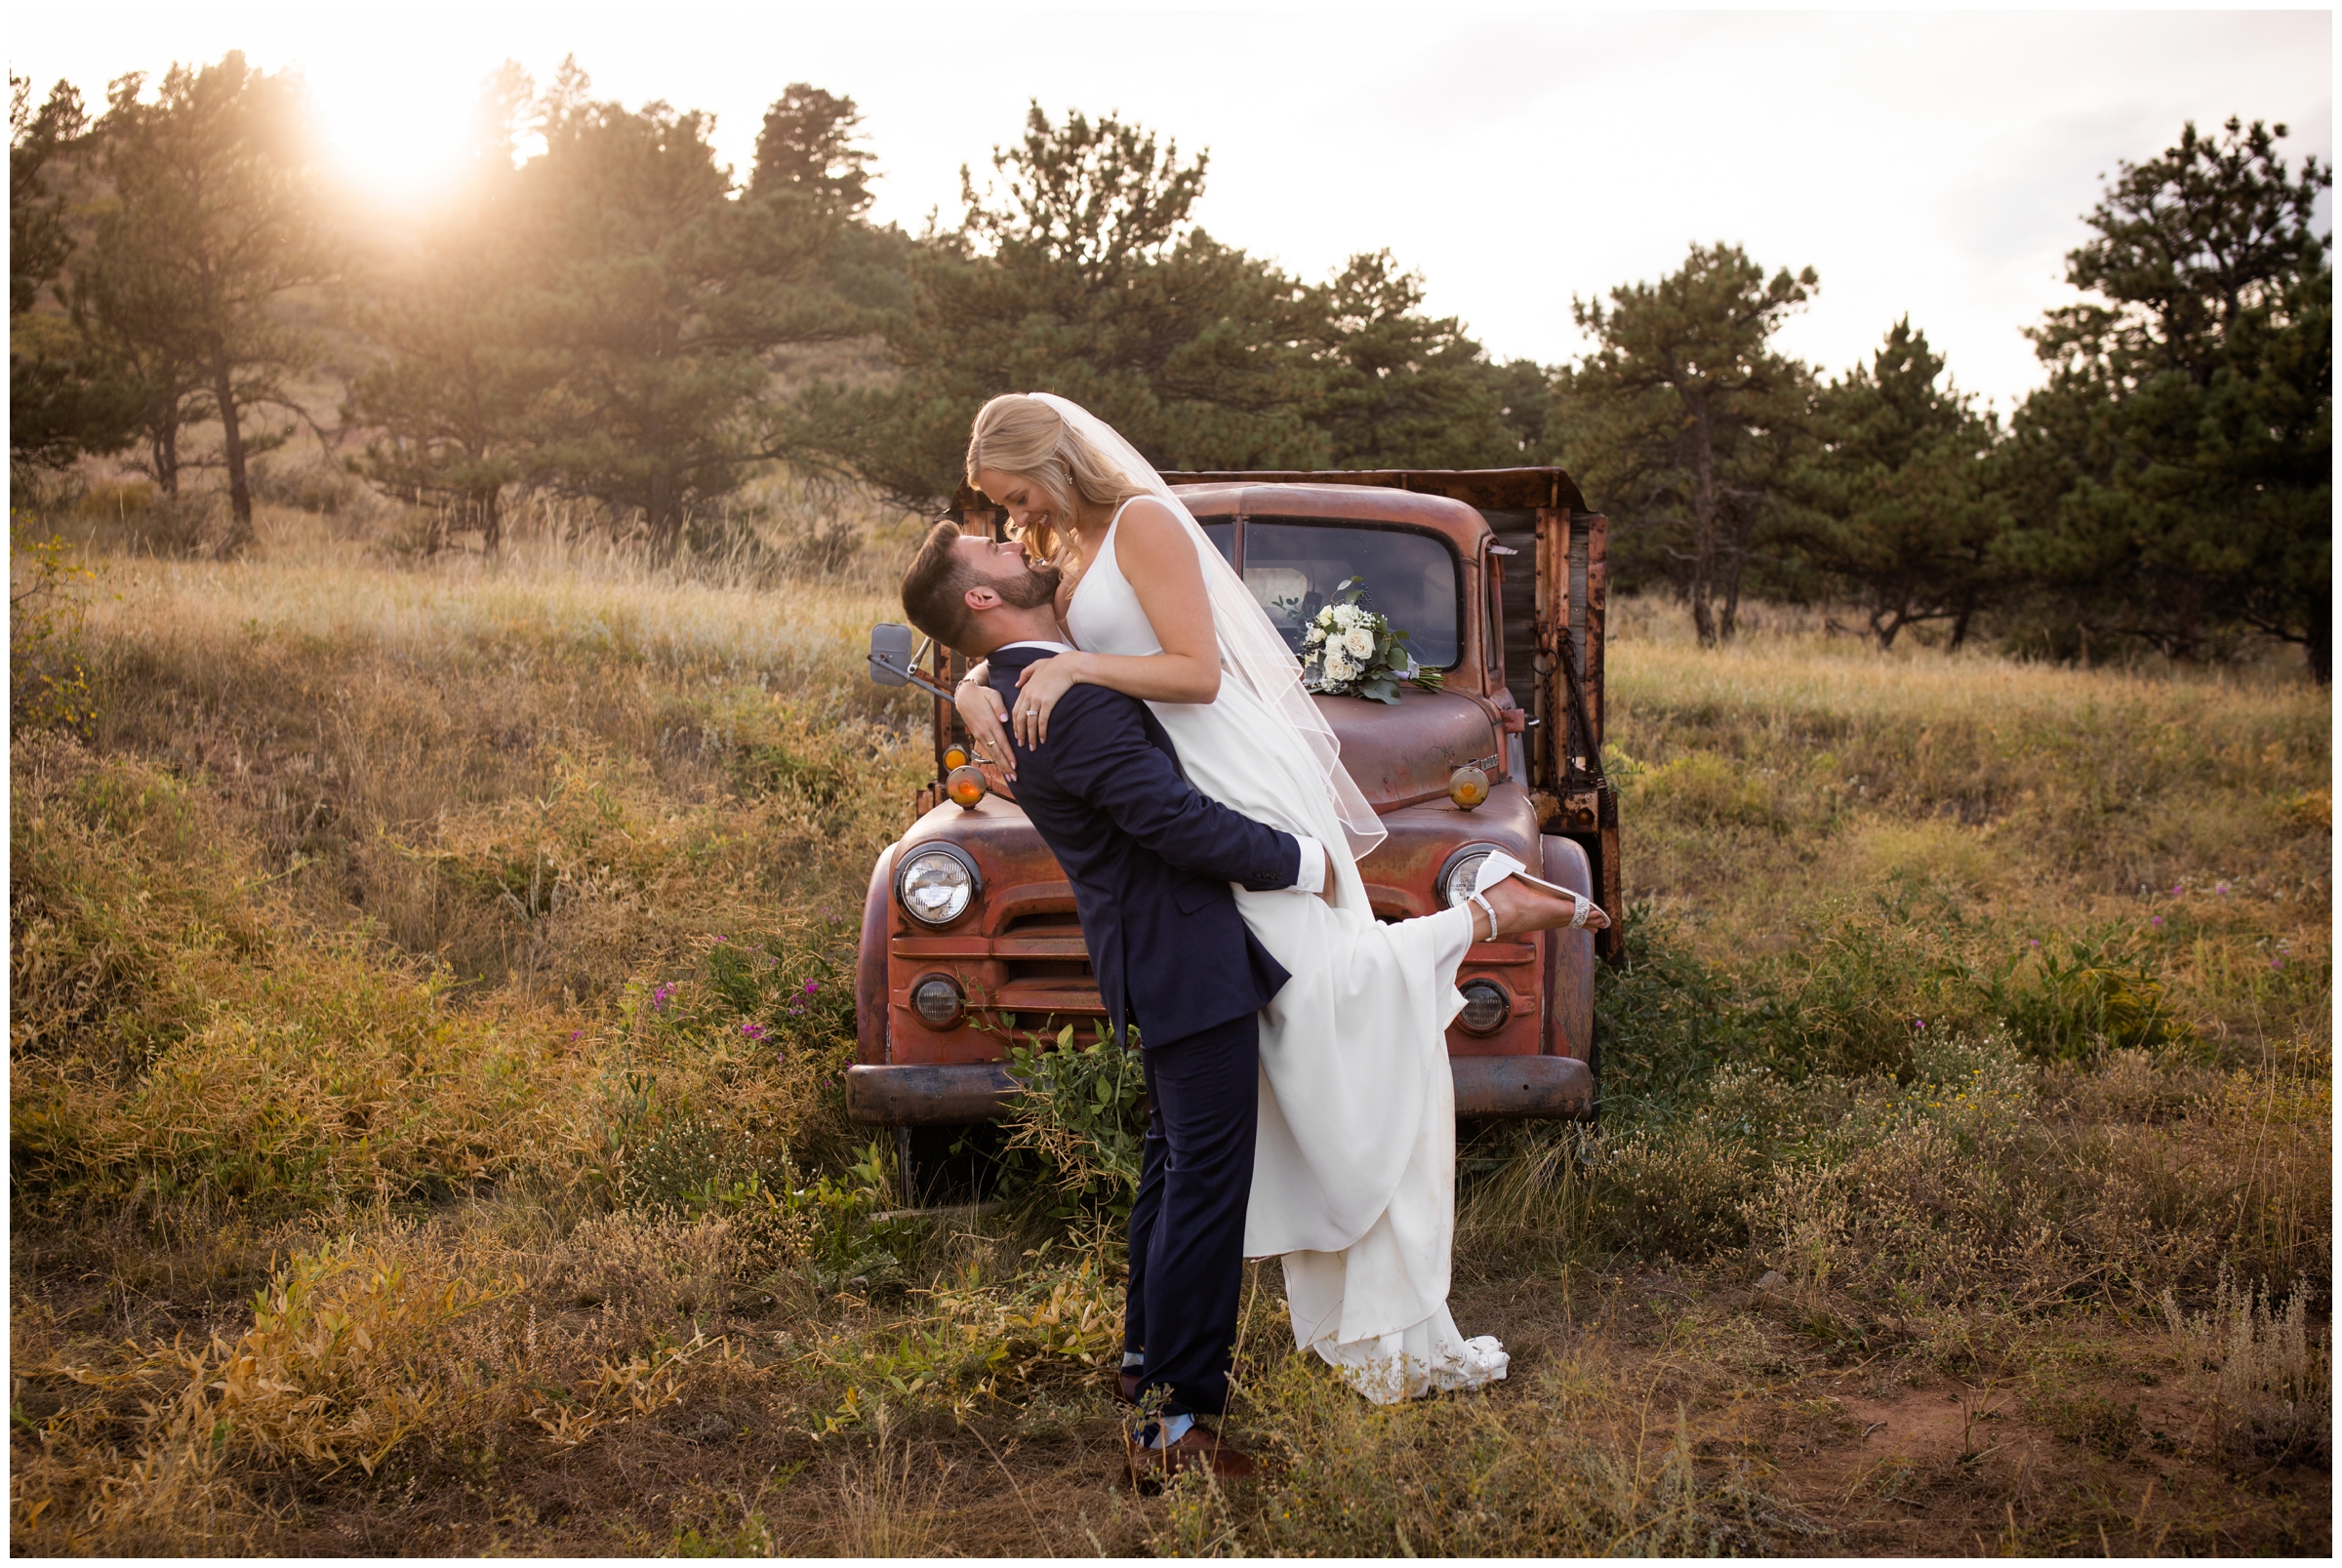 groom lifting bride with vintage truck in background during fall Colorado wedding at Lionscrest Manor